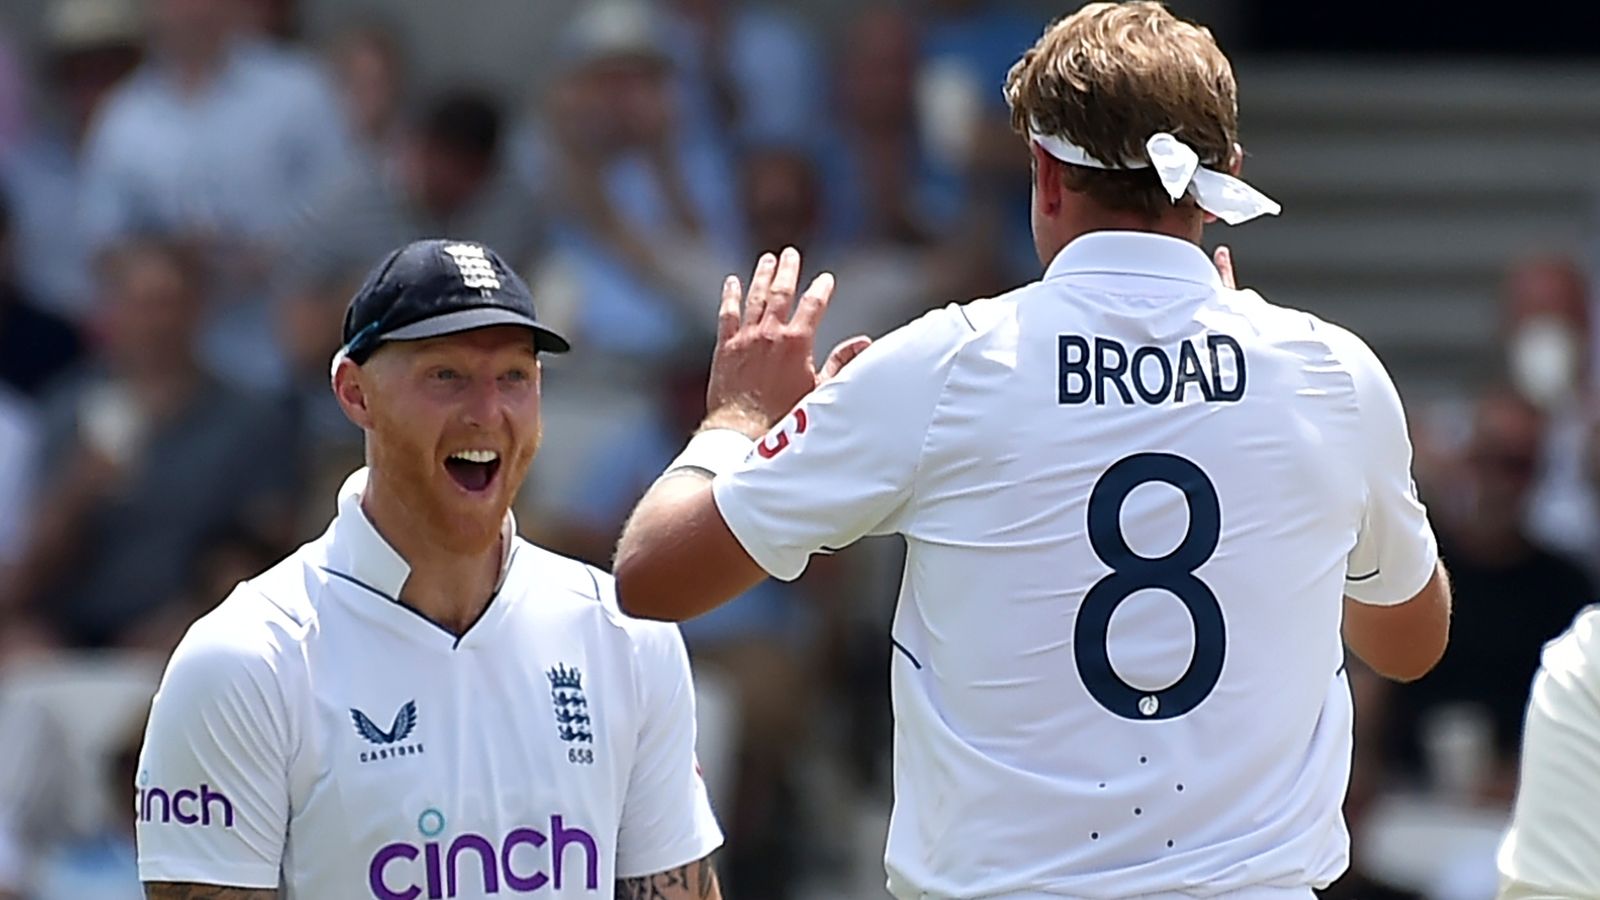 Nasser Hussain: Ben Stokes ‘completely gets’ England captaincy | Michael Atherton: The best captains are born and not made